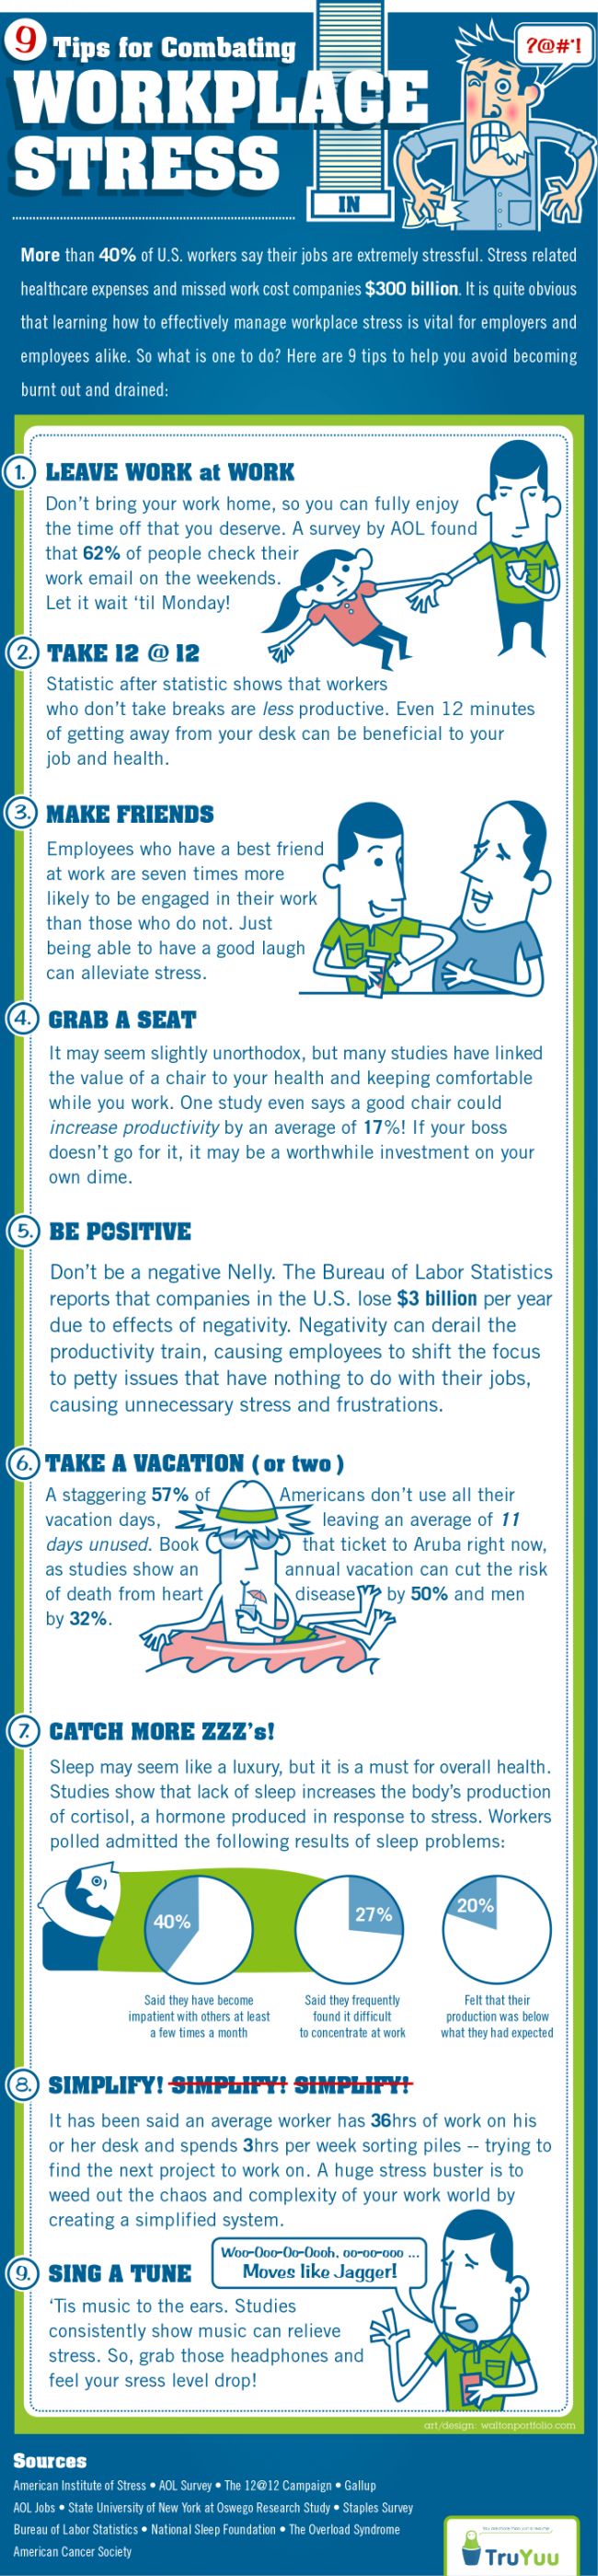 Corporate Wellness Infographic - Impact of Workplace Stress